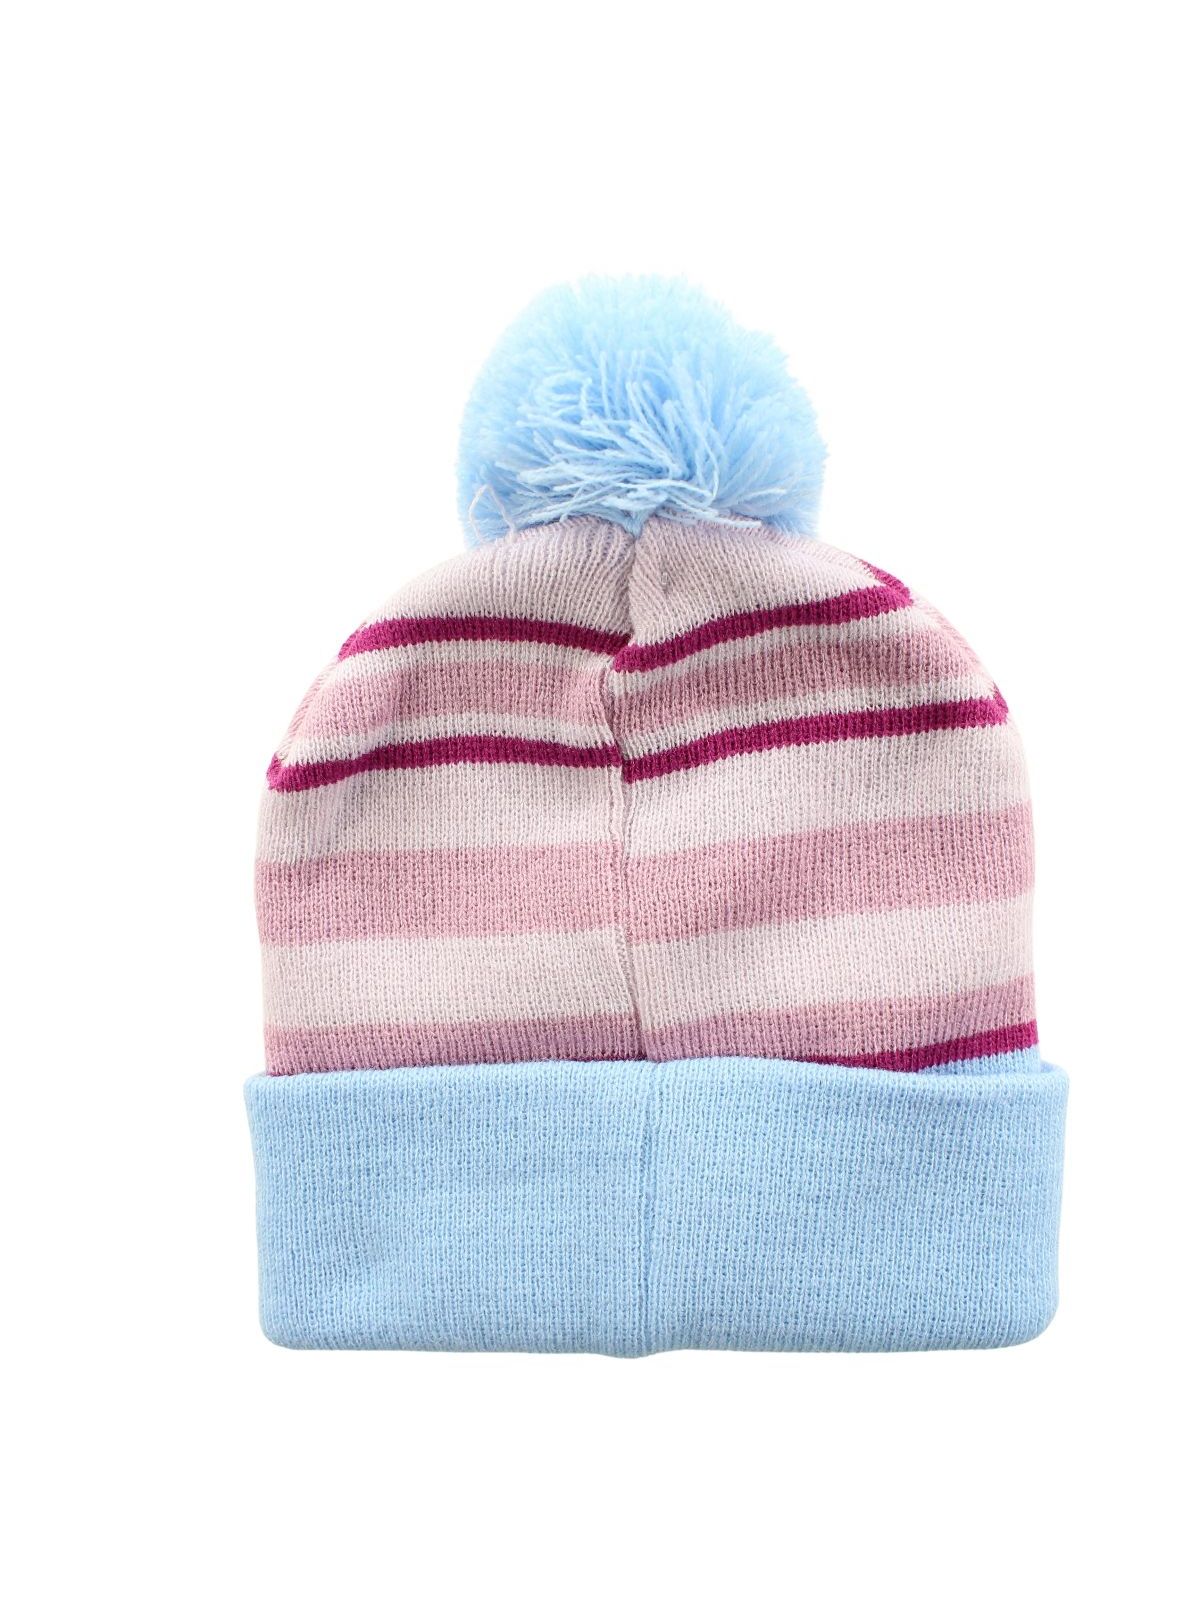 Frozen hat with pompom